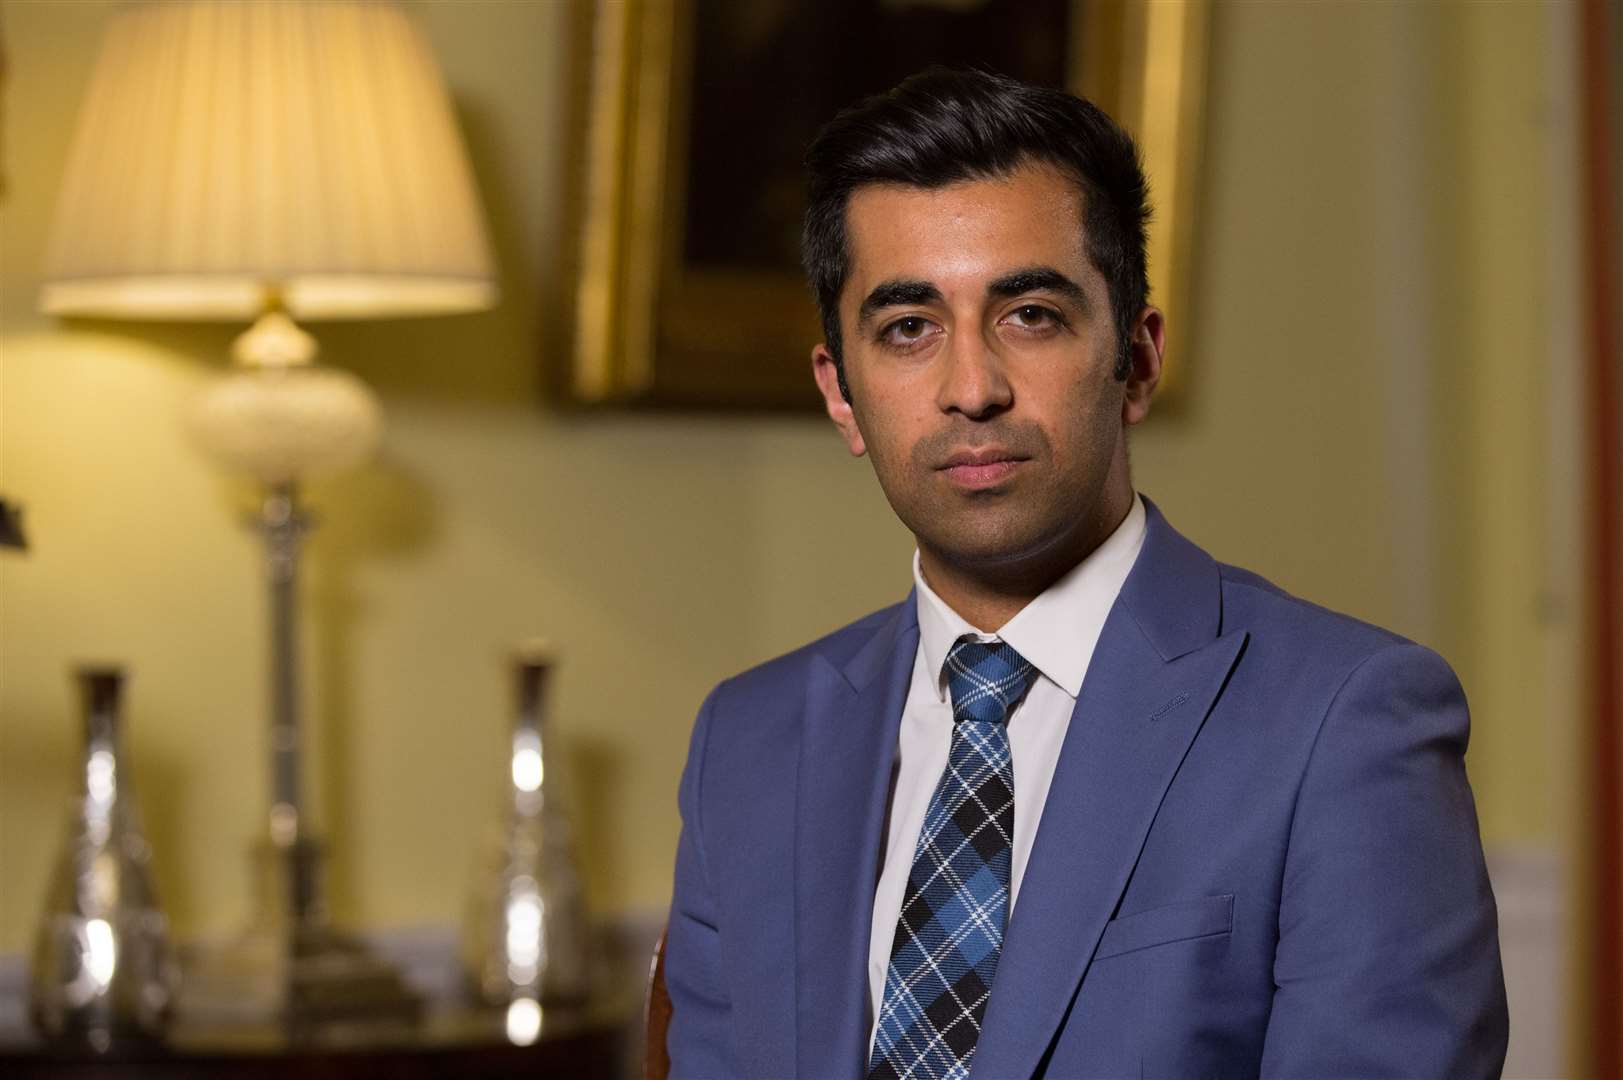 Humza Yousaf was appointed Cabinet Secretary for Health and Social Care in May.